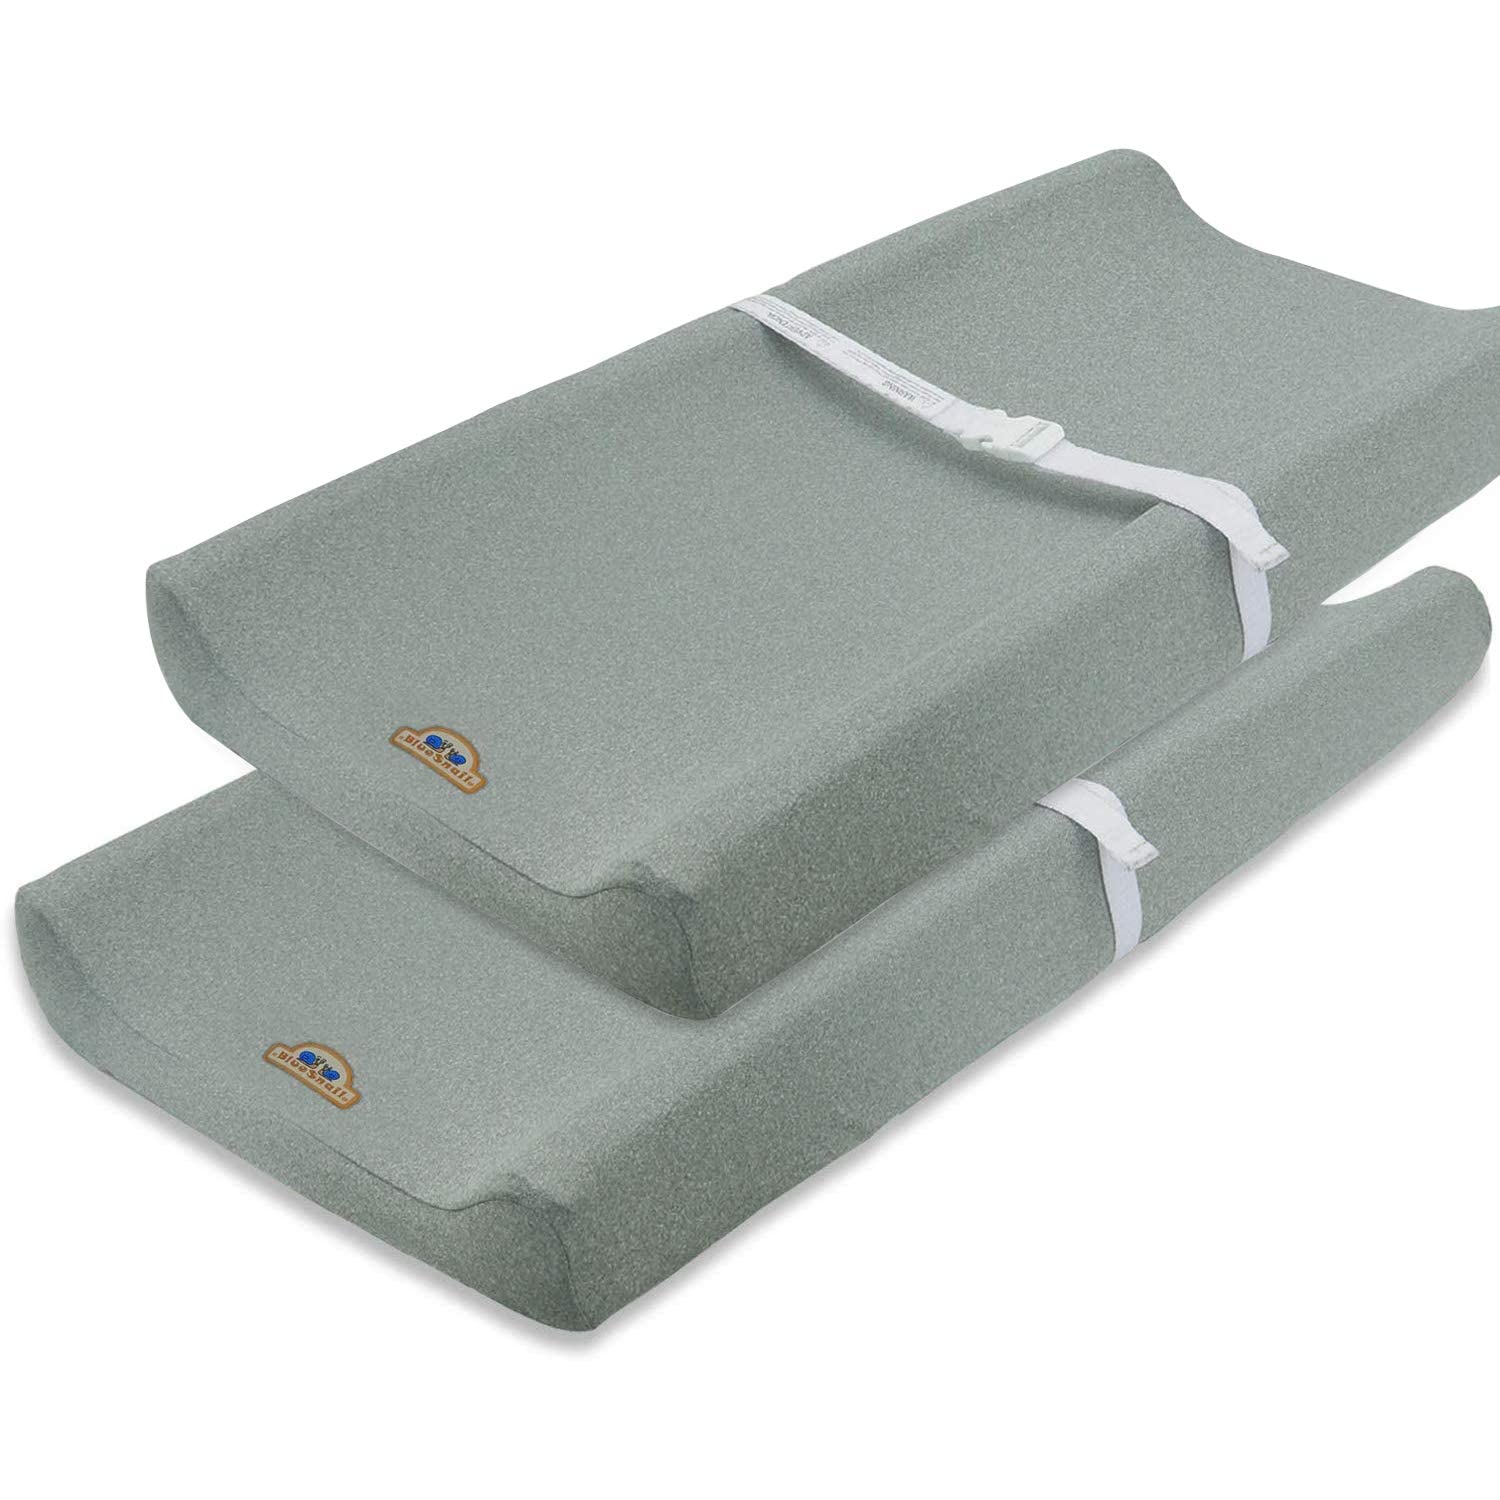 Super Soft and Stretchy Changing Pad Cover 2pk by BlueSnail (Heather Grey)